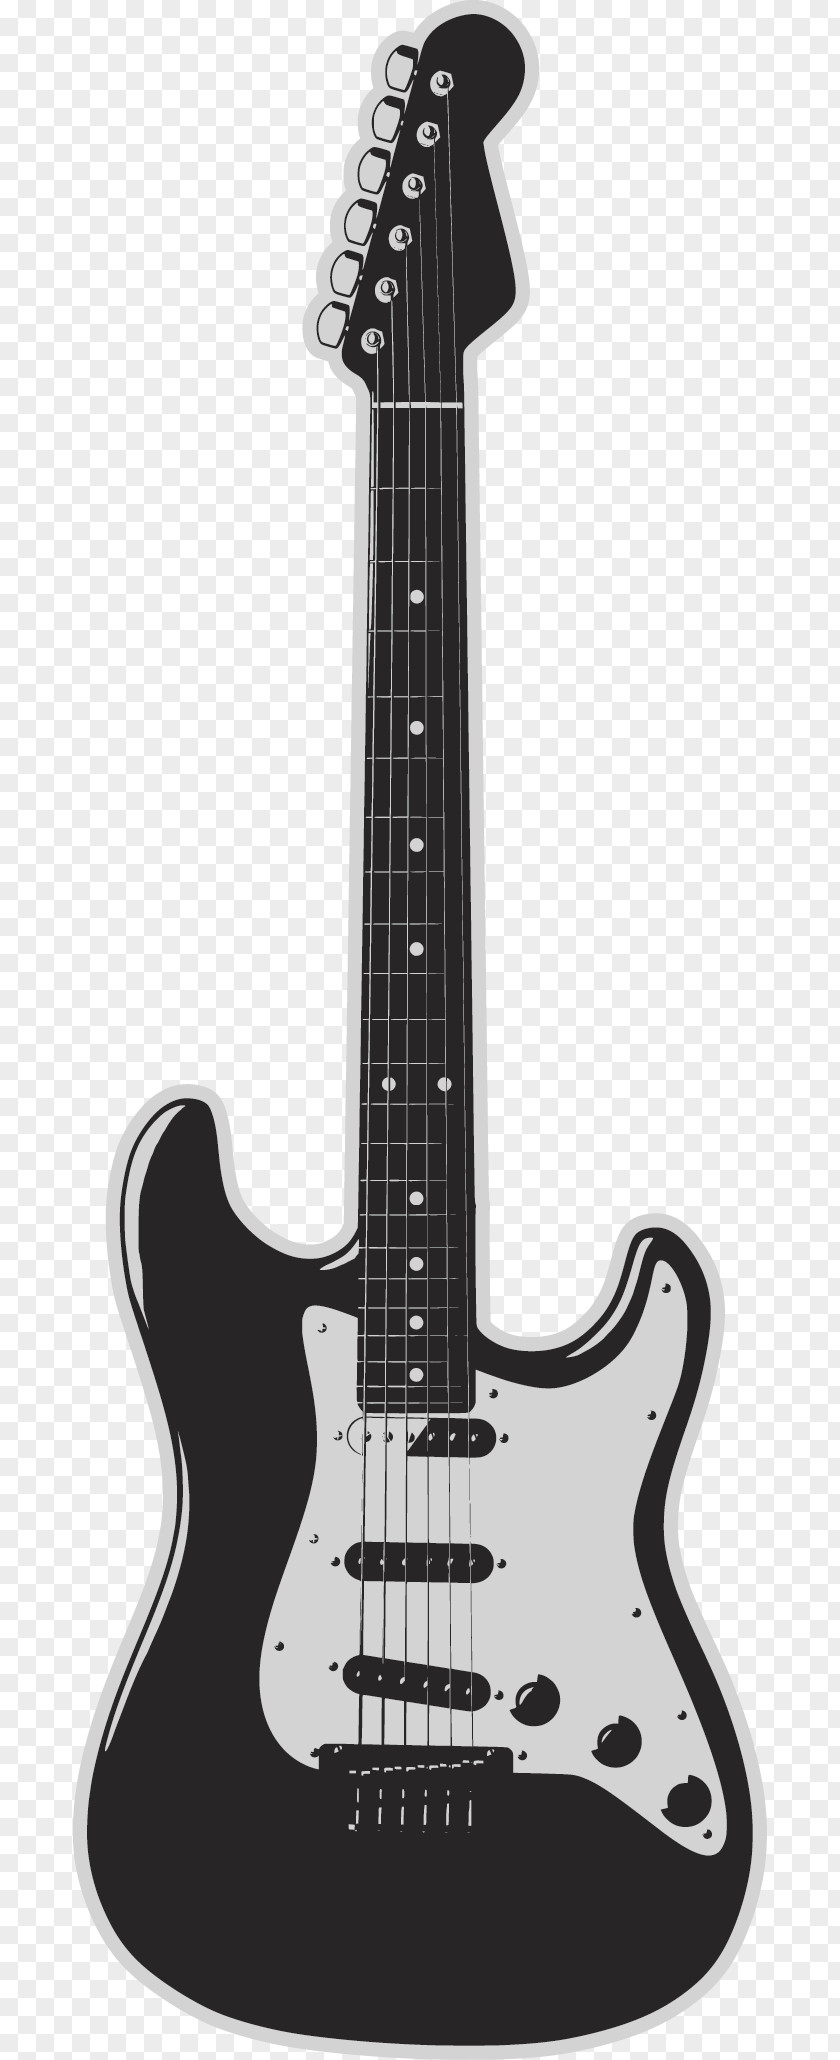 Musical Guitar Bass Vector Rock Band Fender Stratocaster Instrument Electric PNG